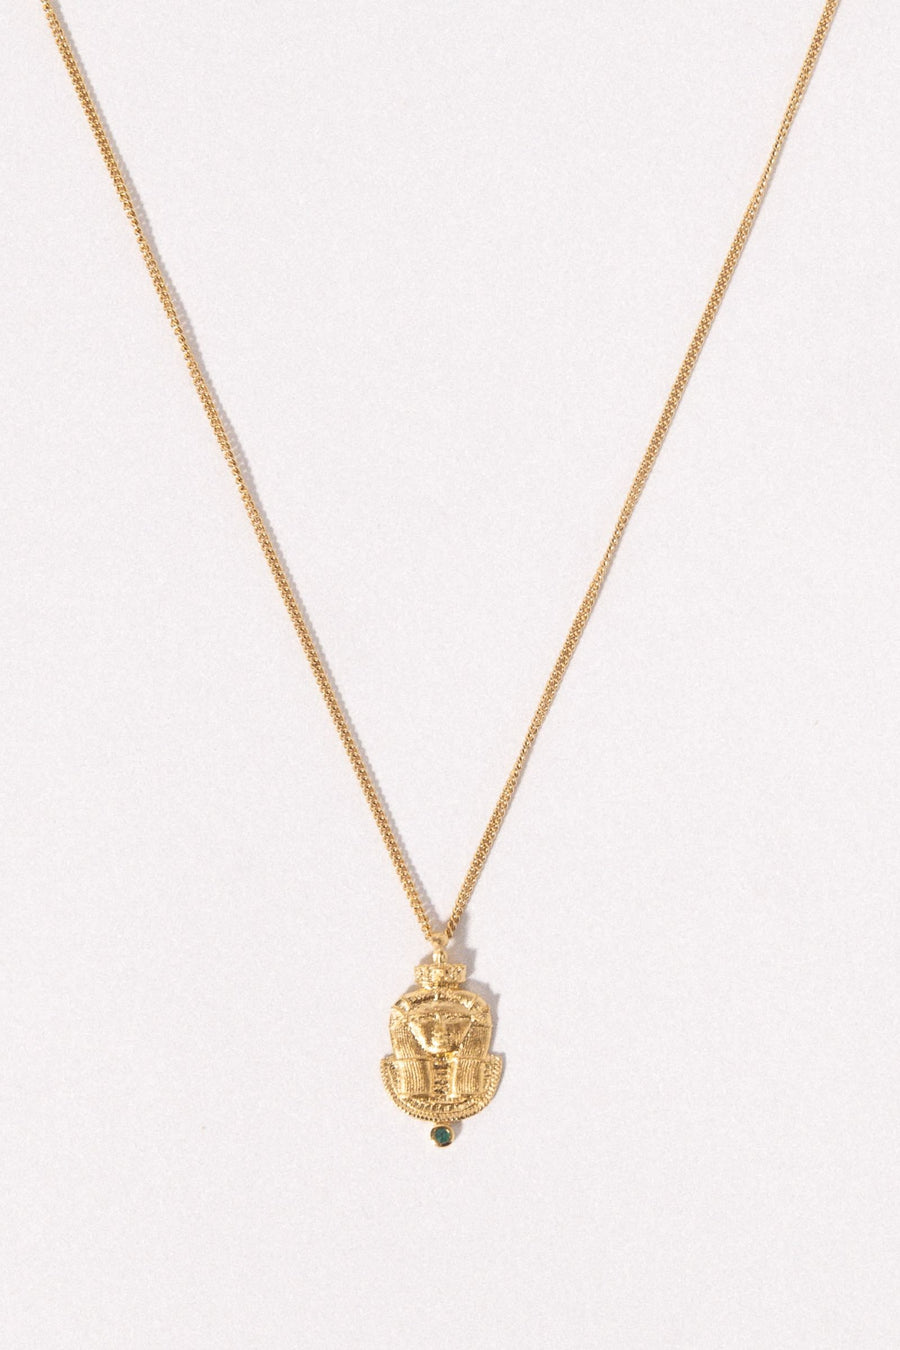 Temple of the Sun Jewelry Gold / 18 inch Dendera Necklace